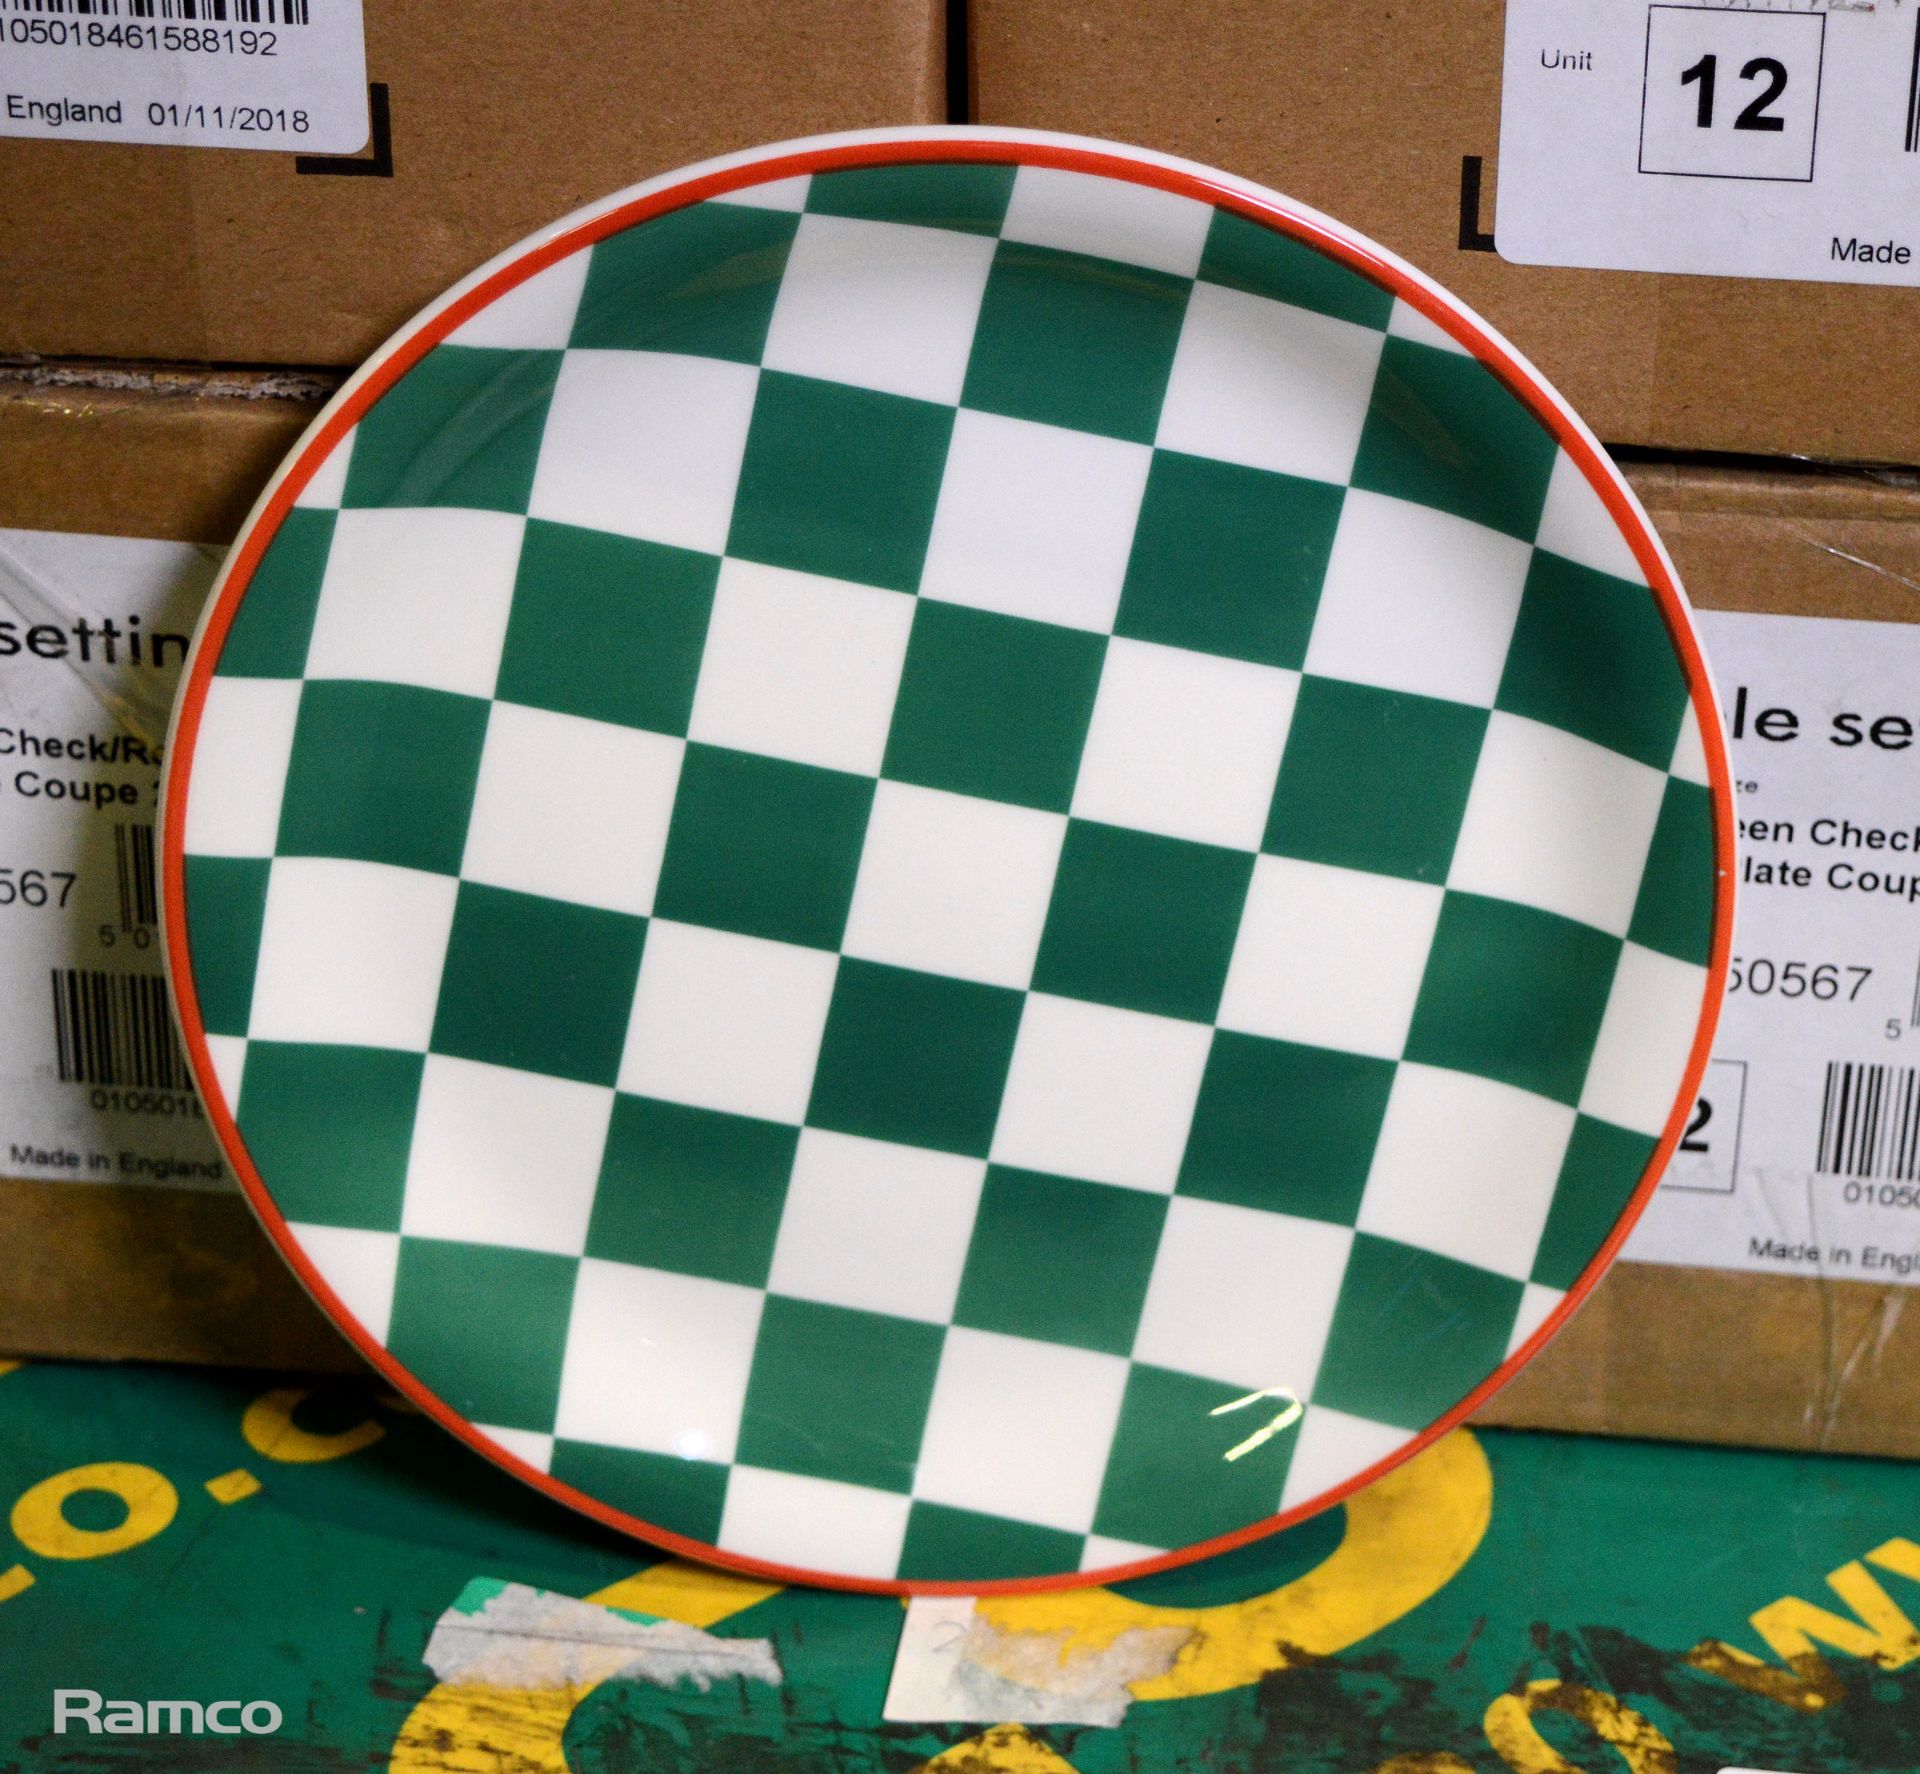 6x Box of 12 green check/red rim coupe plates 20.25cm/8in diameter - Image 2 of 2